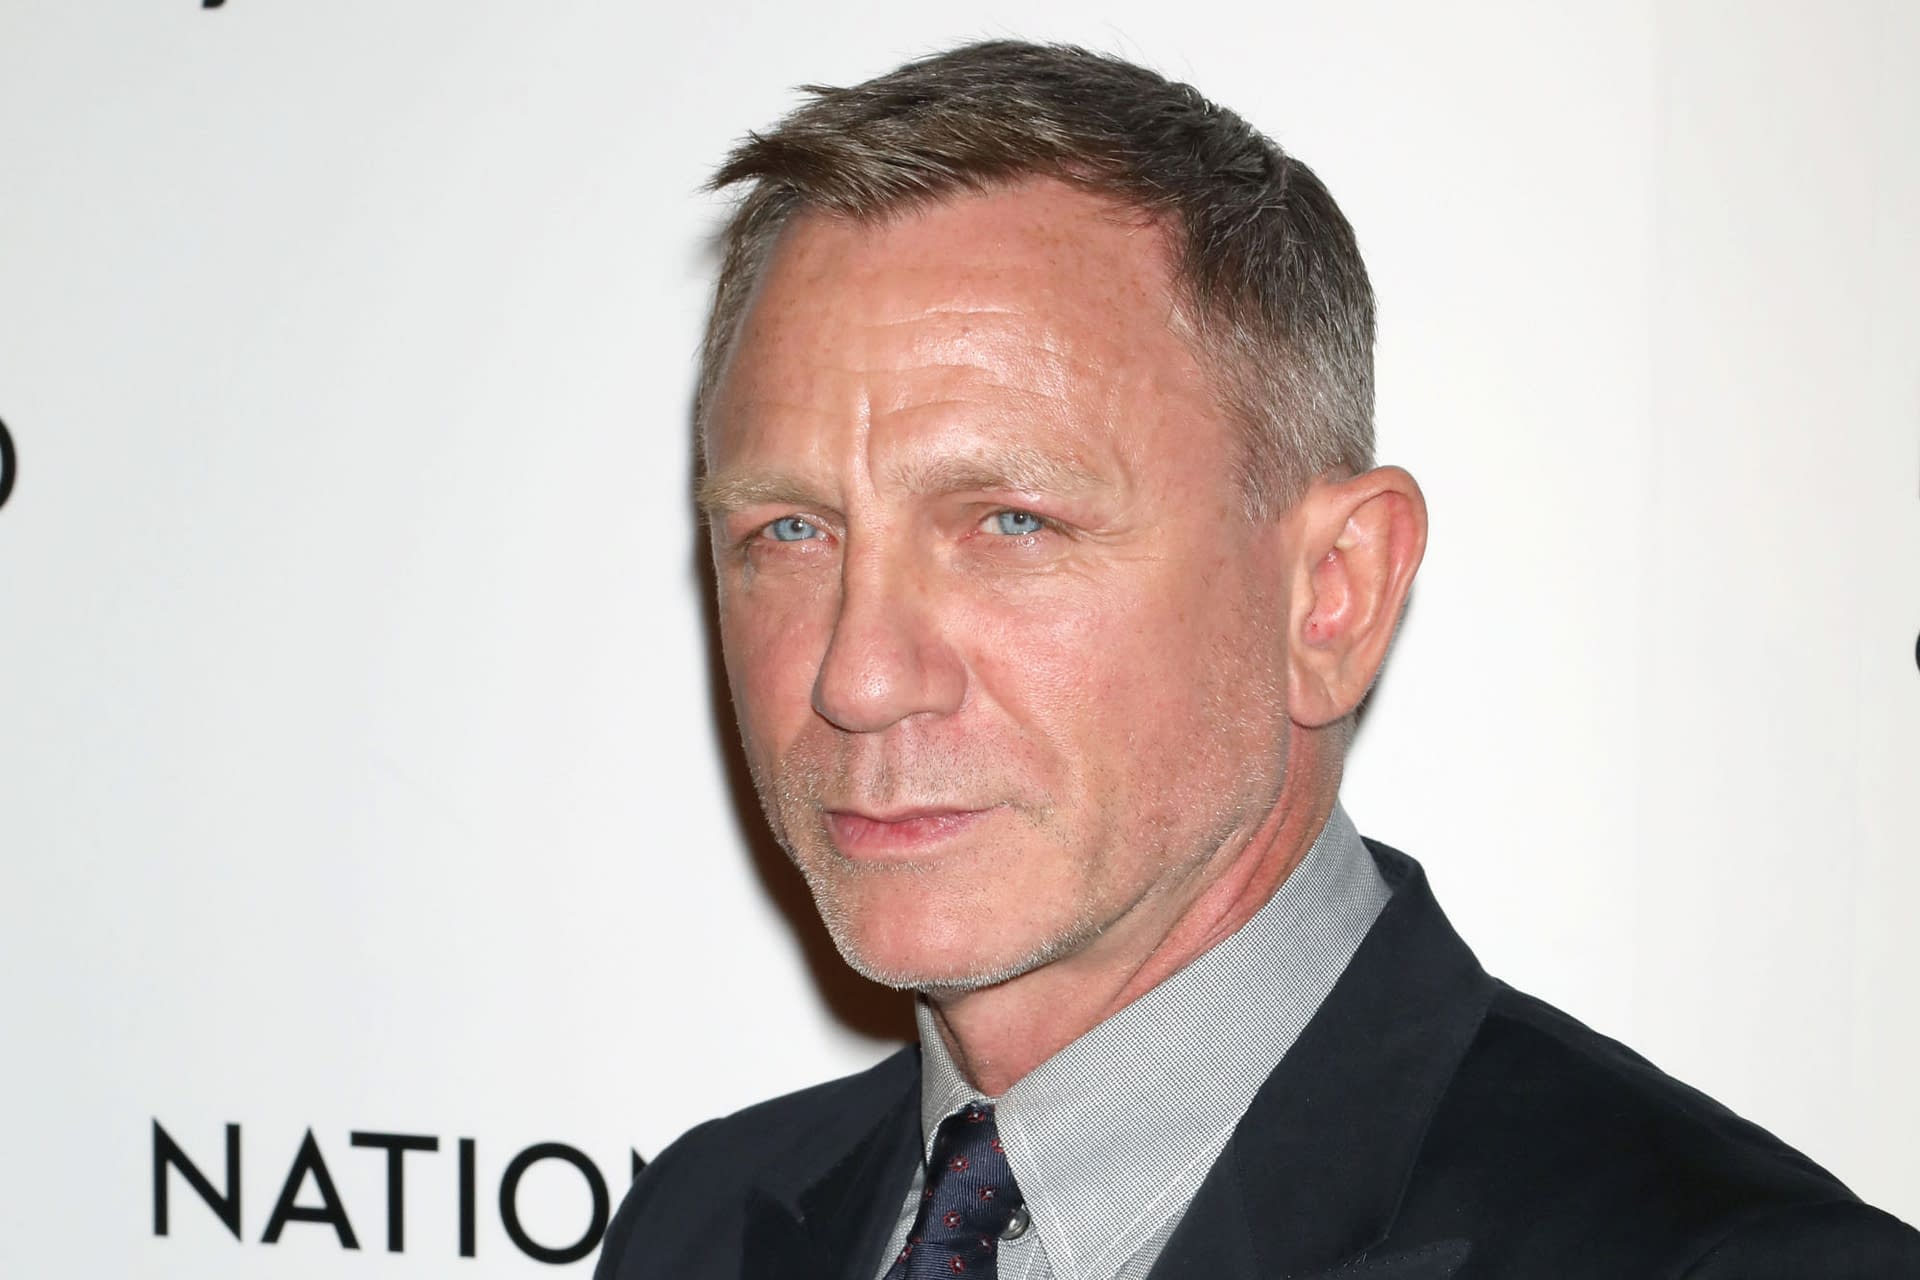 "No Time To Die": Daniel Craig Says They Struggled to Keep Trump out of the Movie